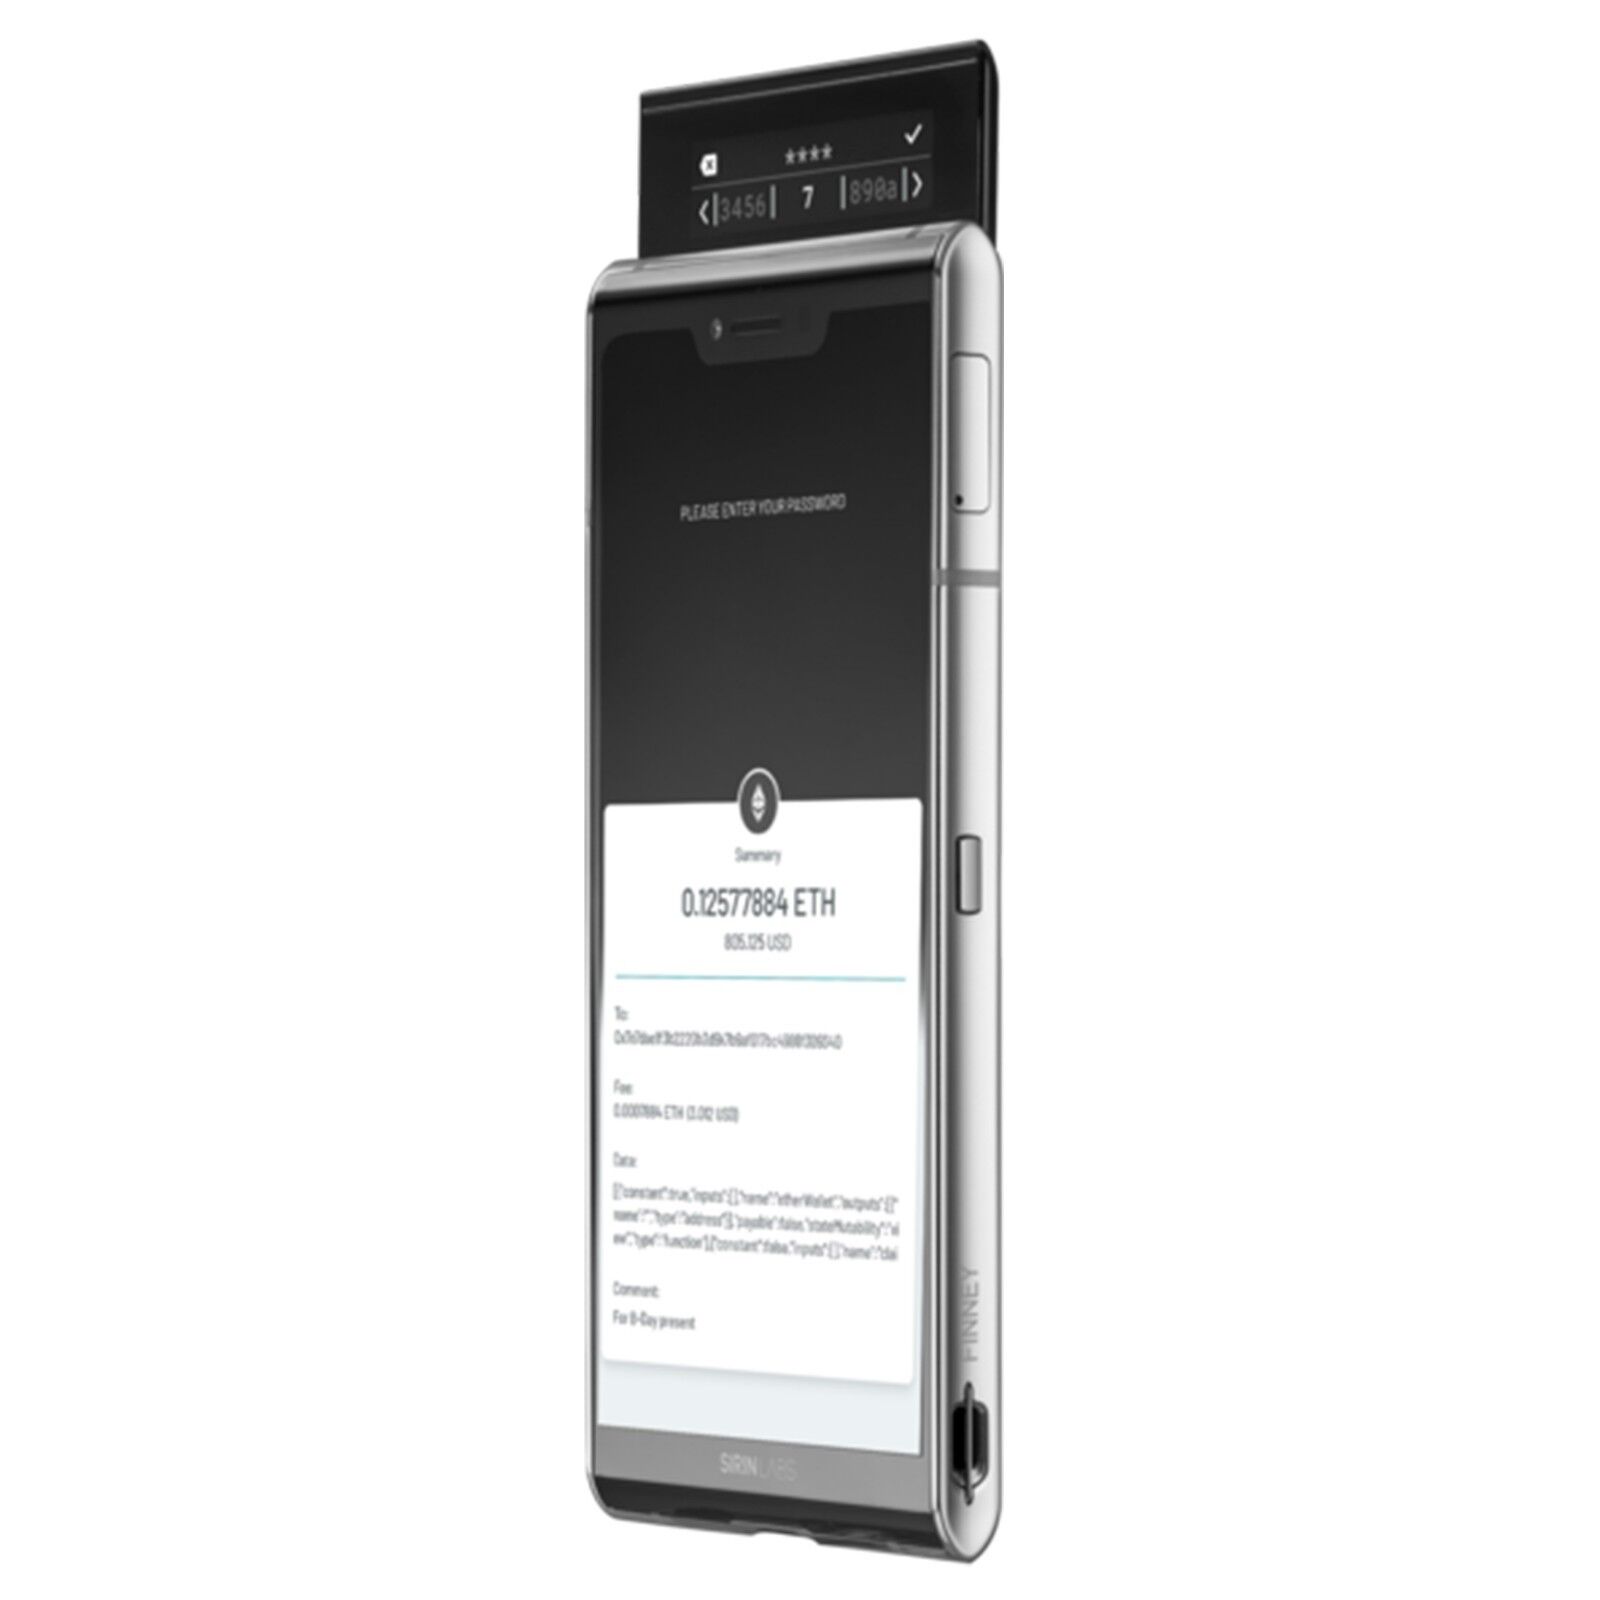 Sirin Labs' $1, cryptocurrency phone arrives this November